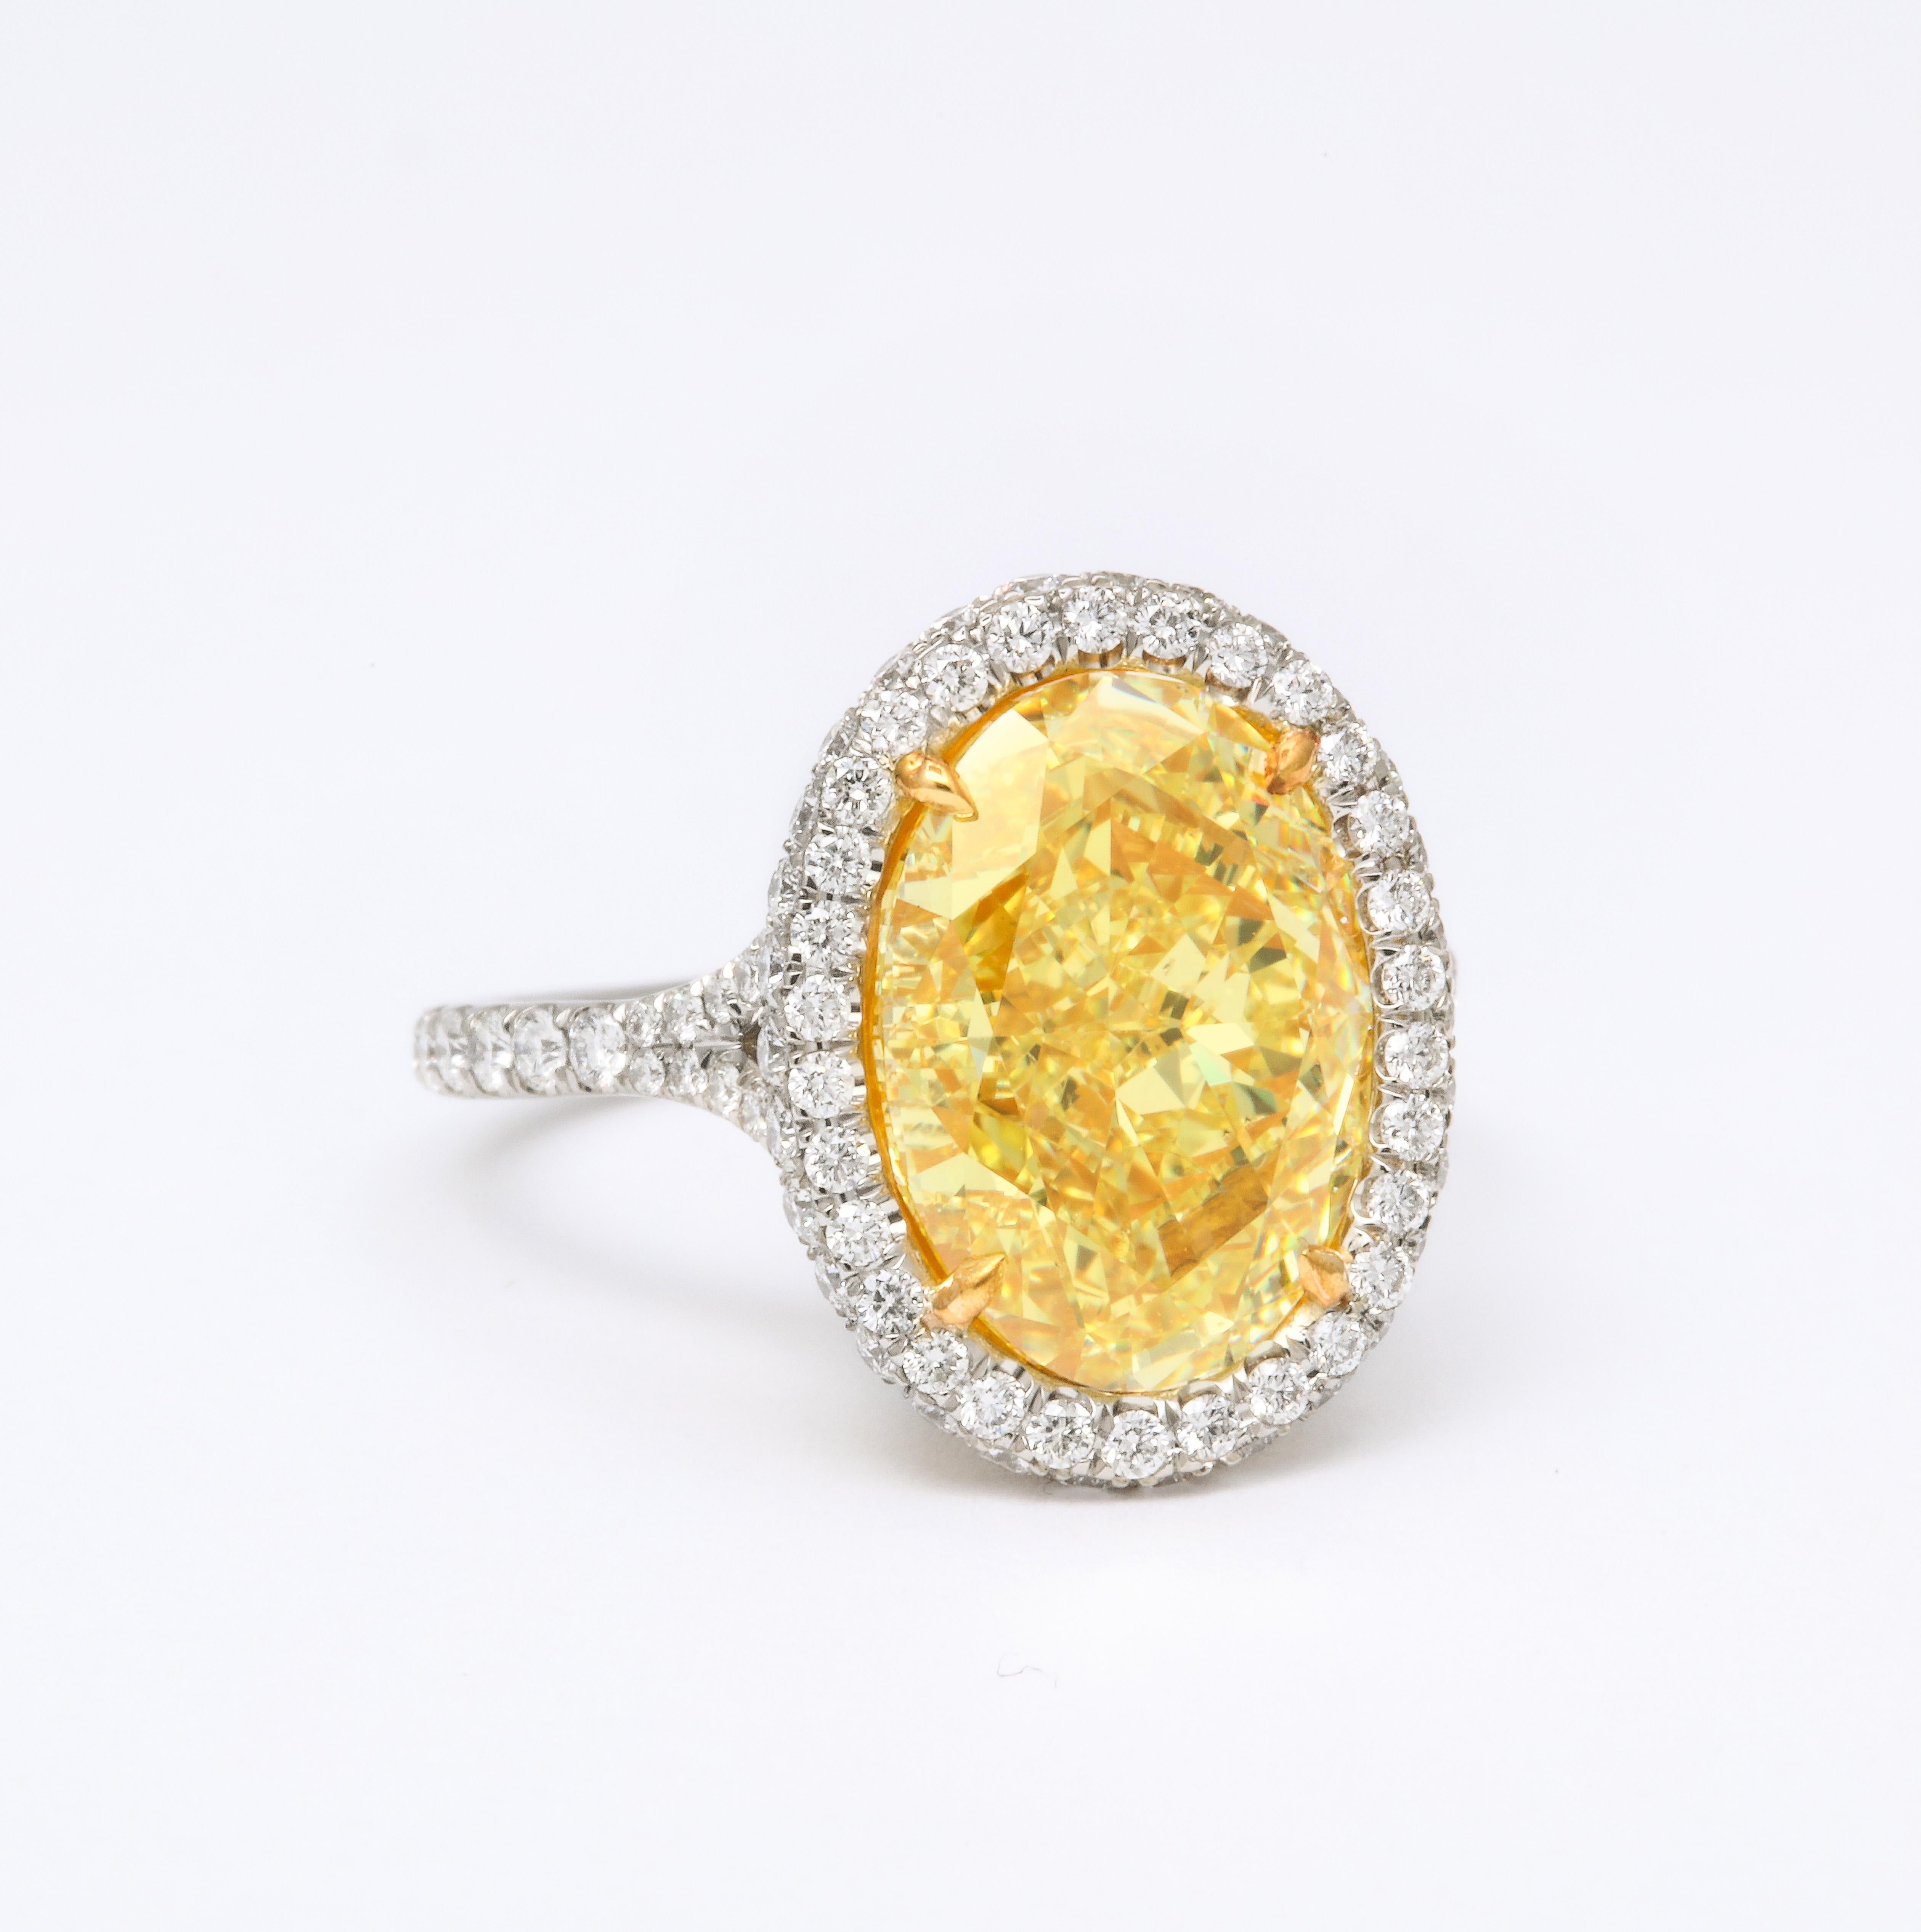 
A FABULOUS yellow diamond ring with deep vibrant yellow color!

GIA Certified 5.05 carat Fancy Yellow, VS2 center diamond. 

Set in a custom, platinum mounting with .85 carats of white round brilliant cut diamonds.

The center diamond measures like